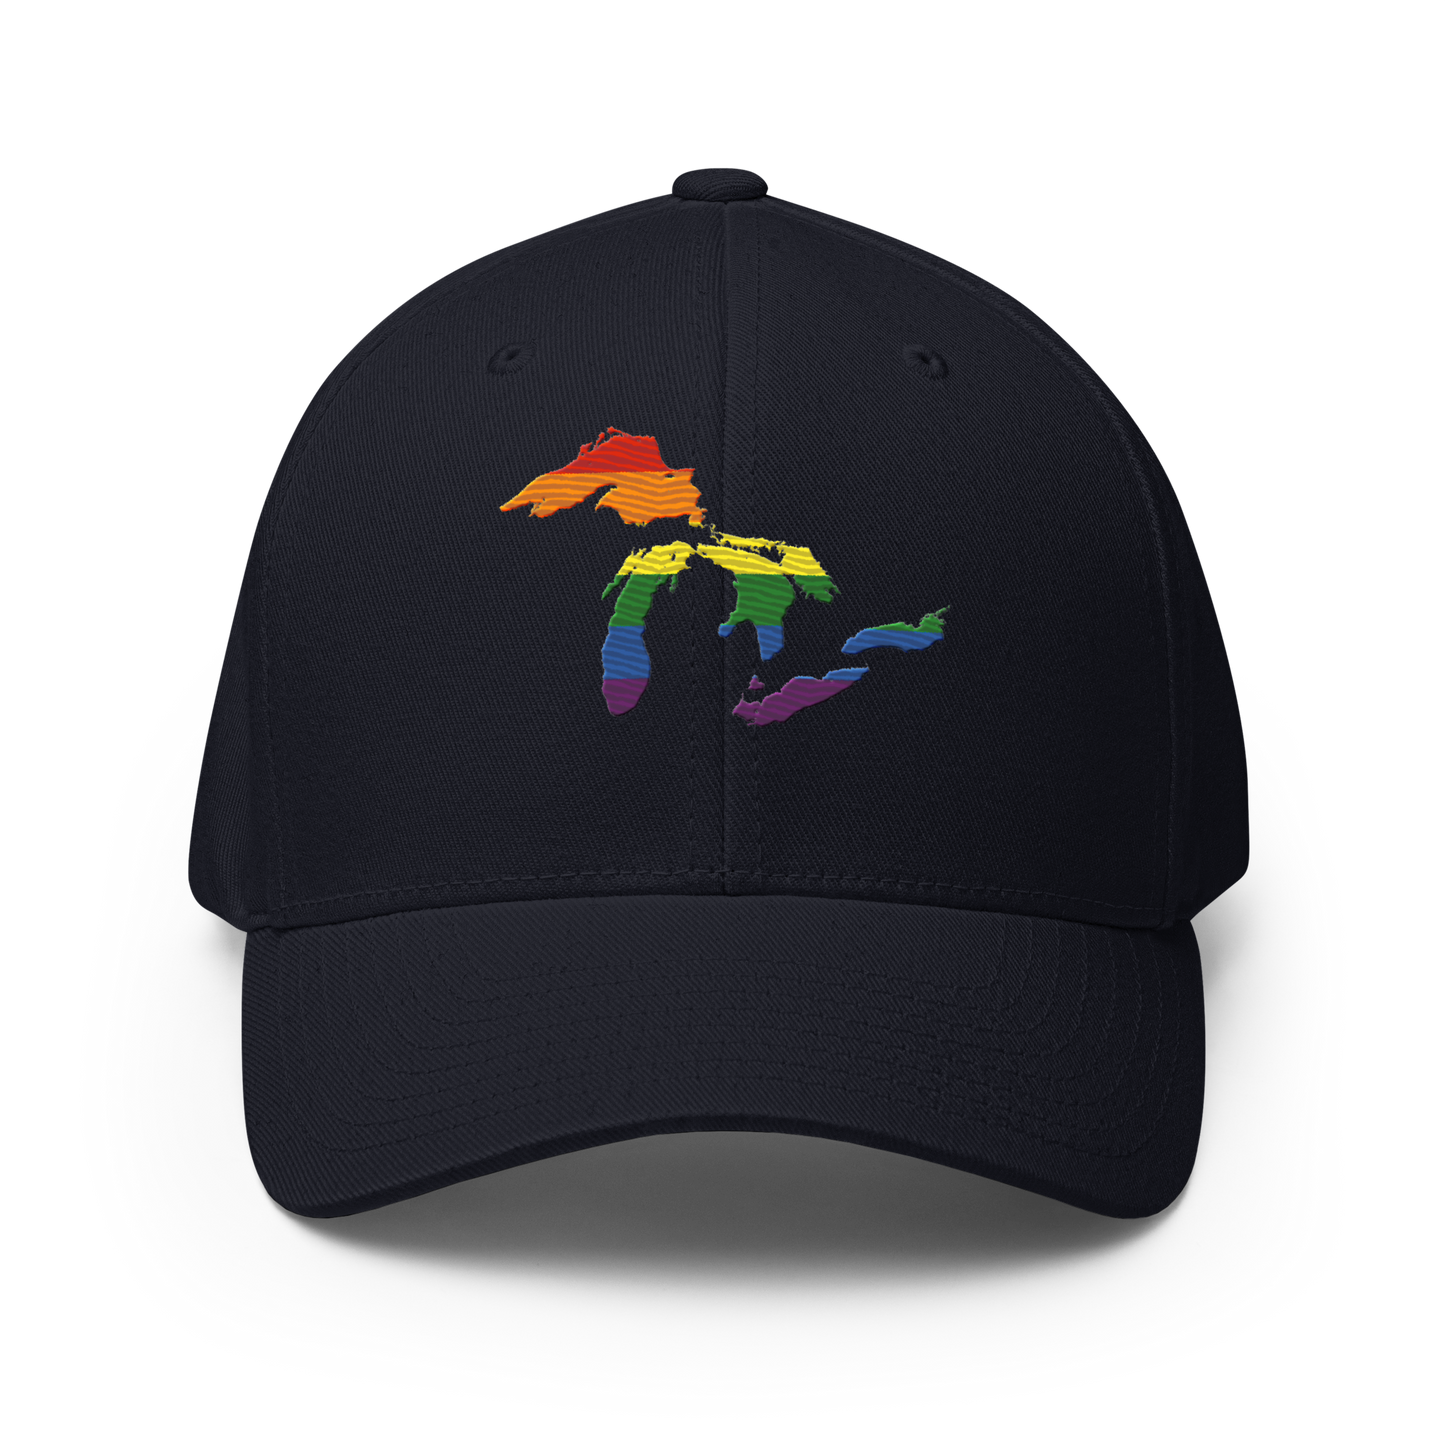 Great Lakes Fitted Baseball Cap (Rainbow Pride Edition)